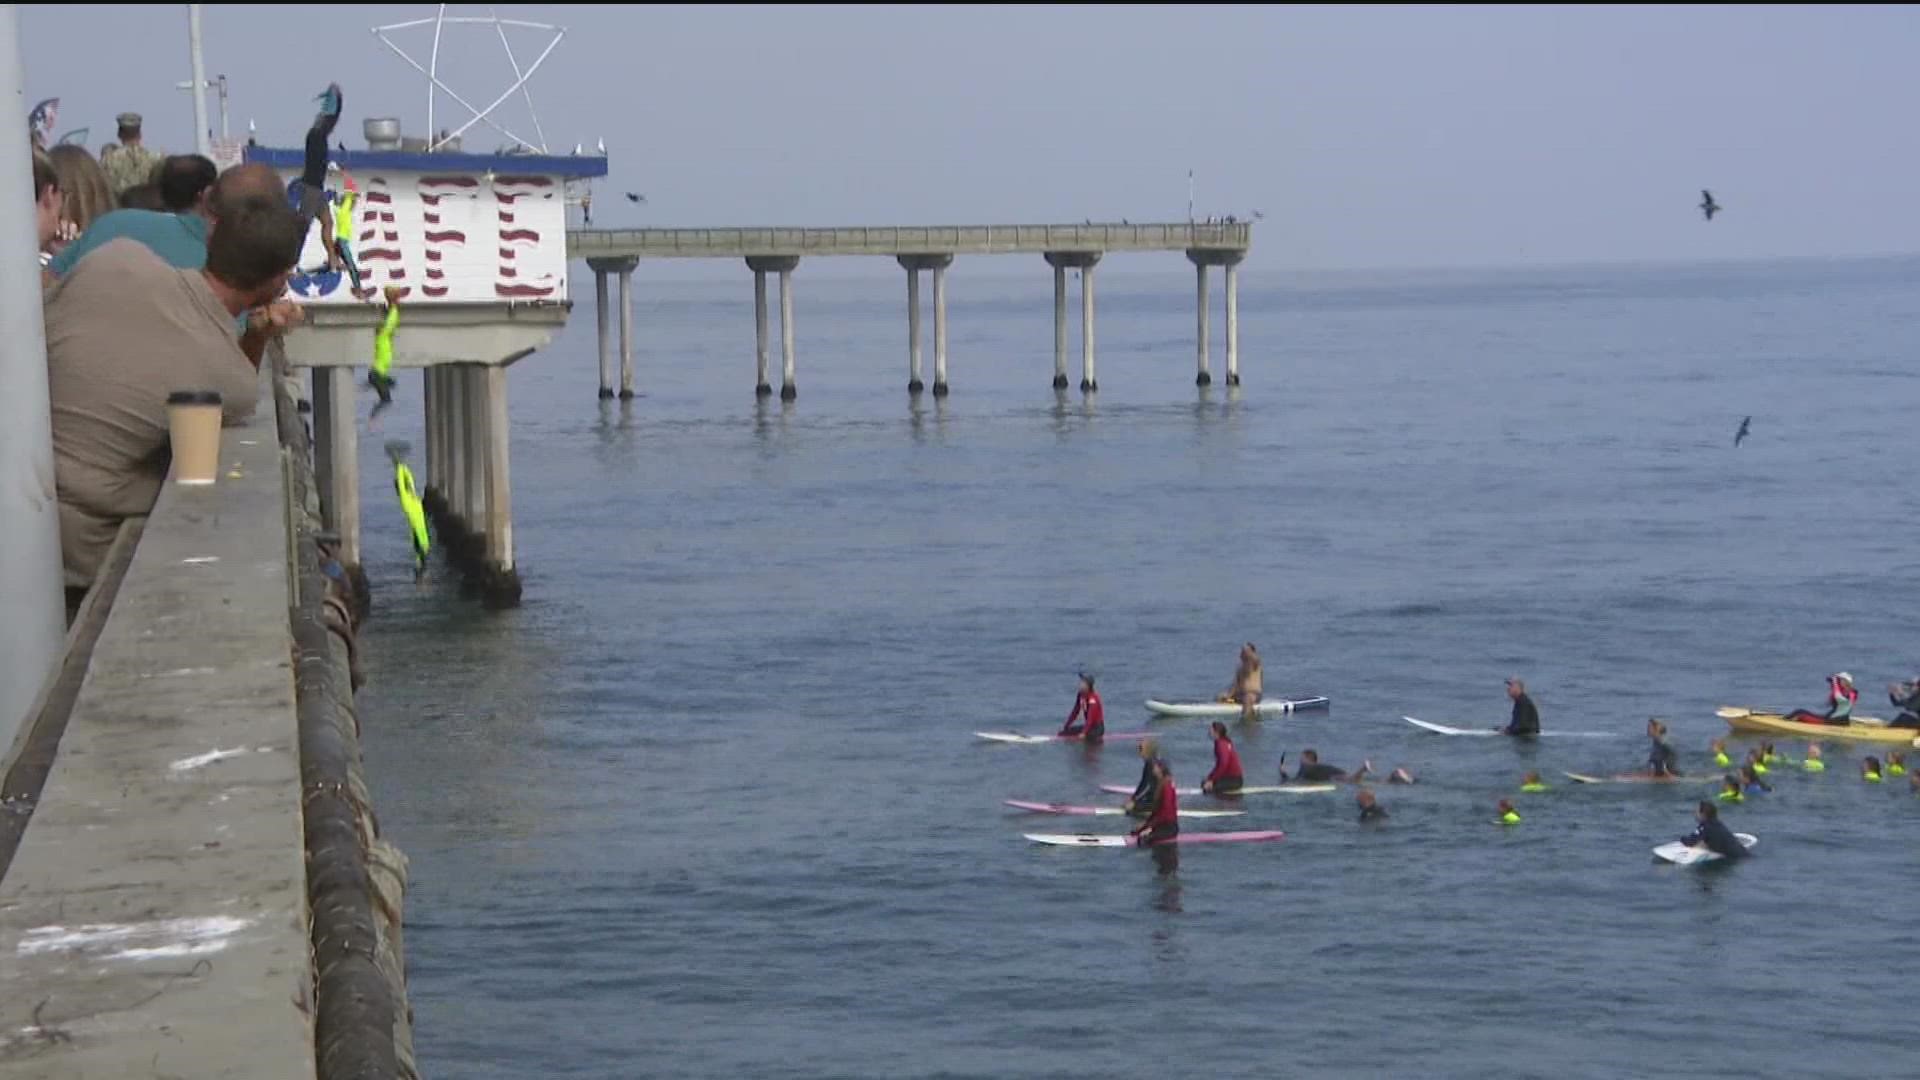 Over the past 25 years, the San Diego Lifeguard Service has successfully managed over 28,000 Junior Lifeguards jumping into the water off the Ocean Beach Pier.